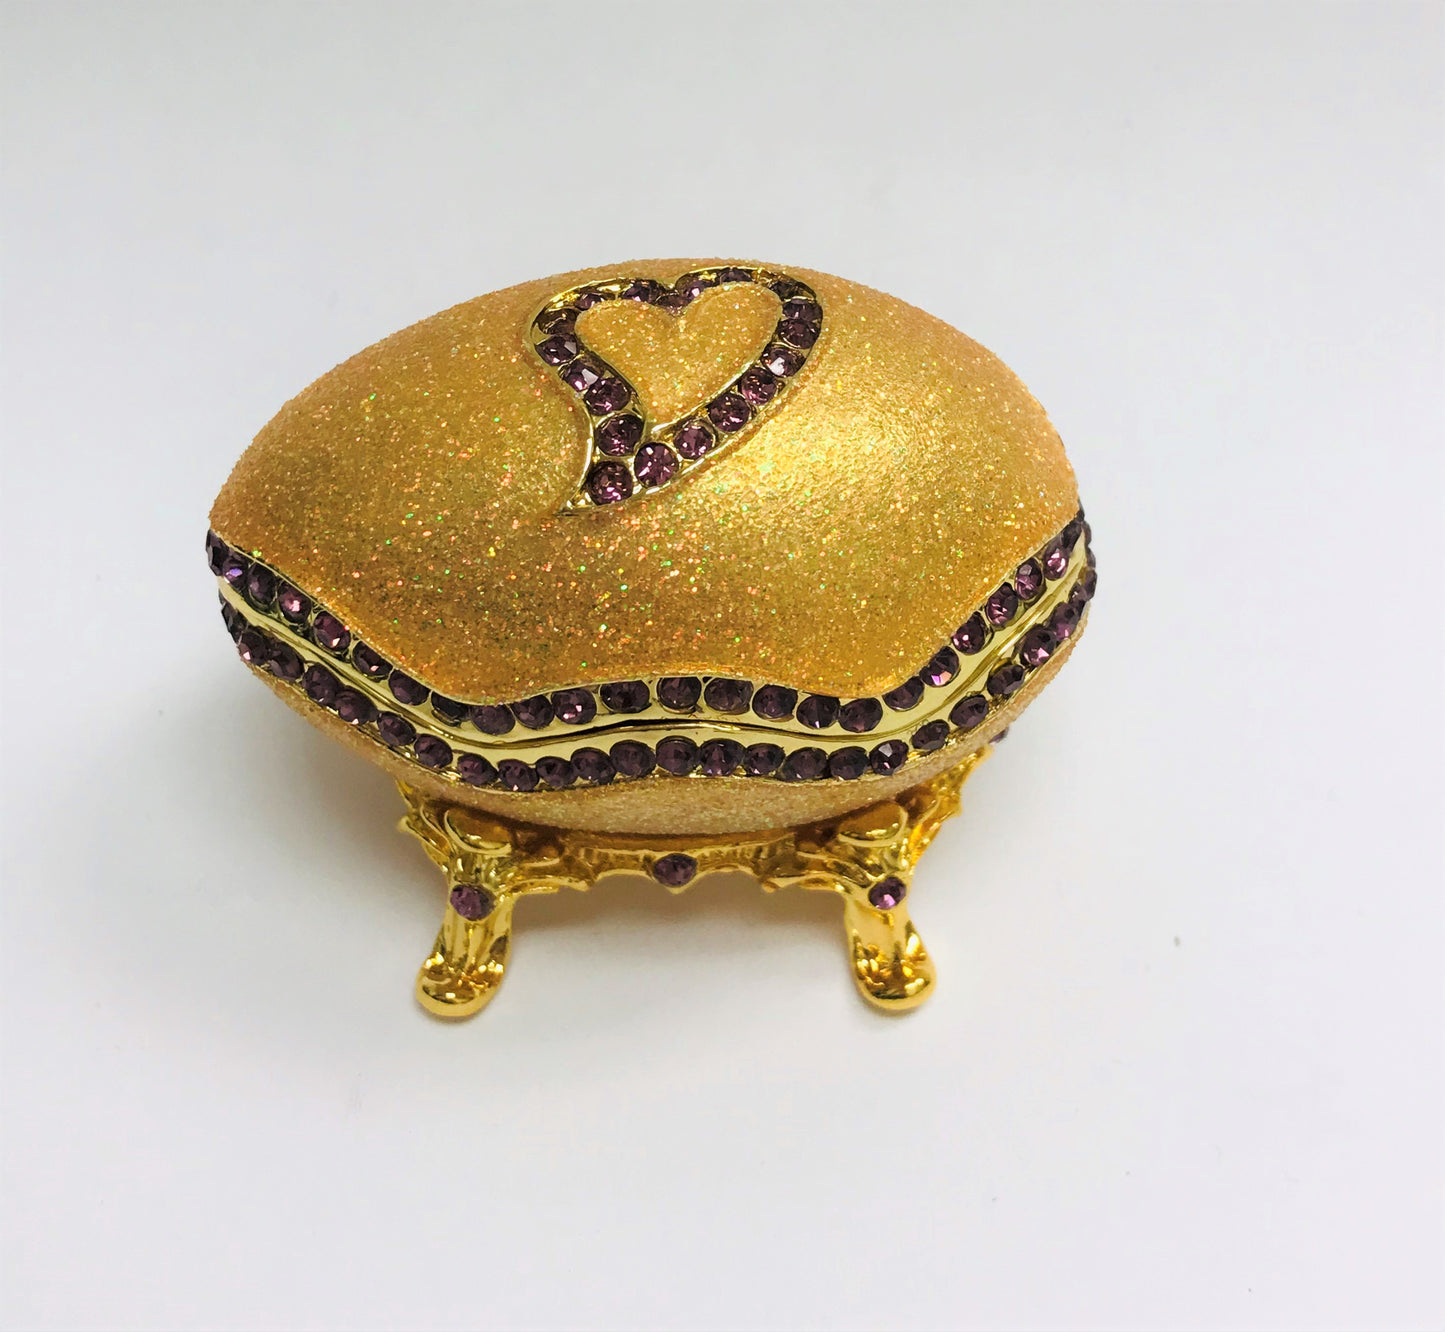 Cristiani Collezione Golden Faberge Style Egg with Crystal Heart Trinket Box